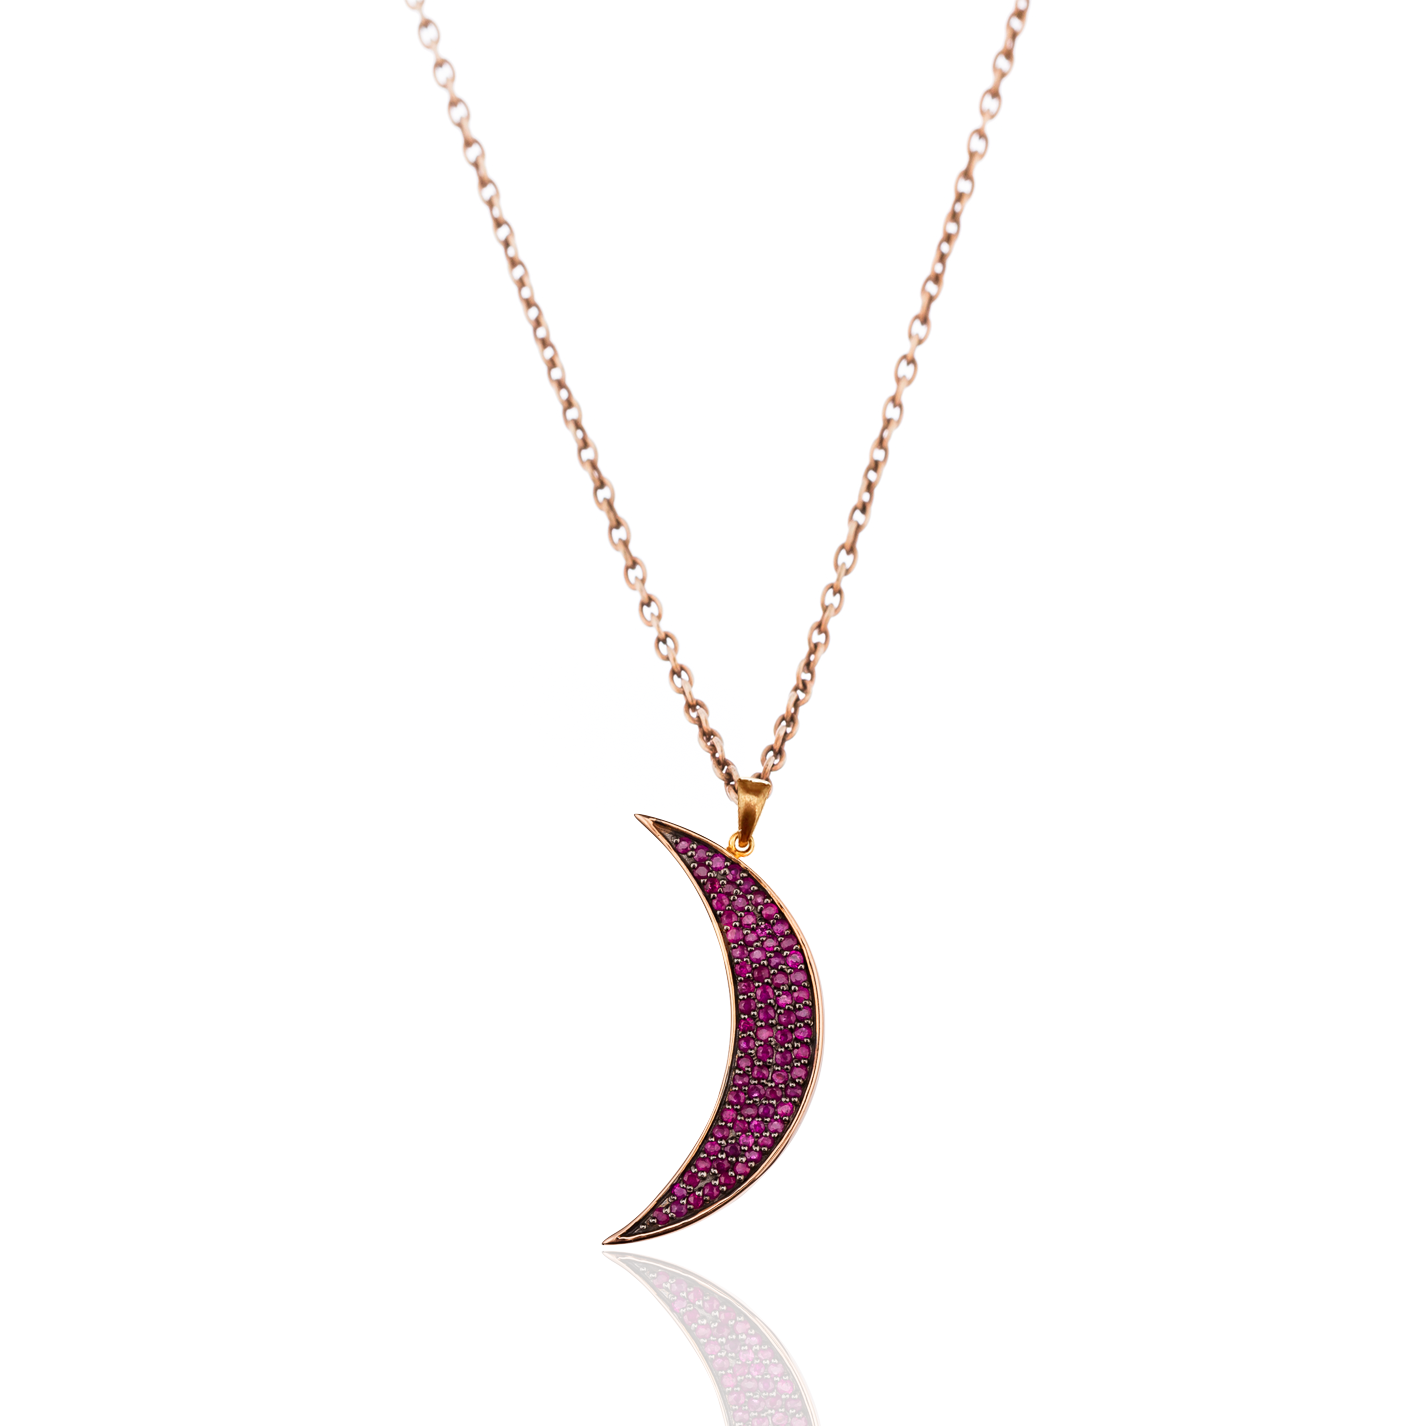 925 Silver Medium Moon Necklace with Rubies